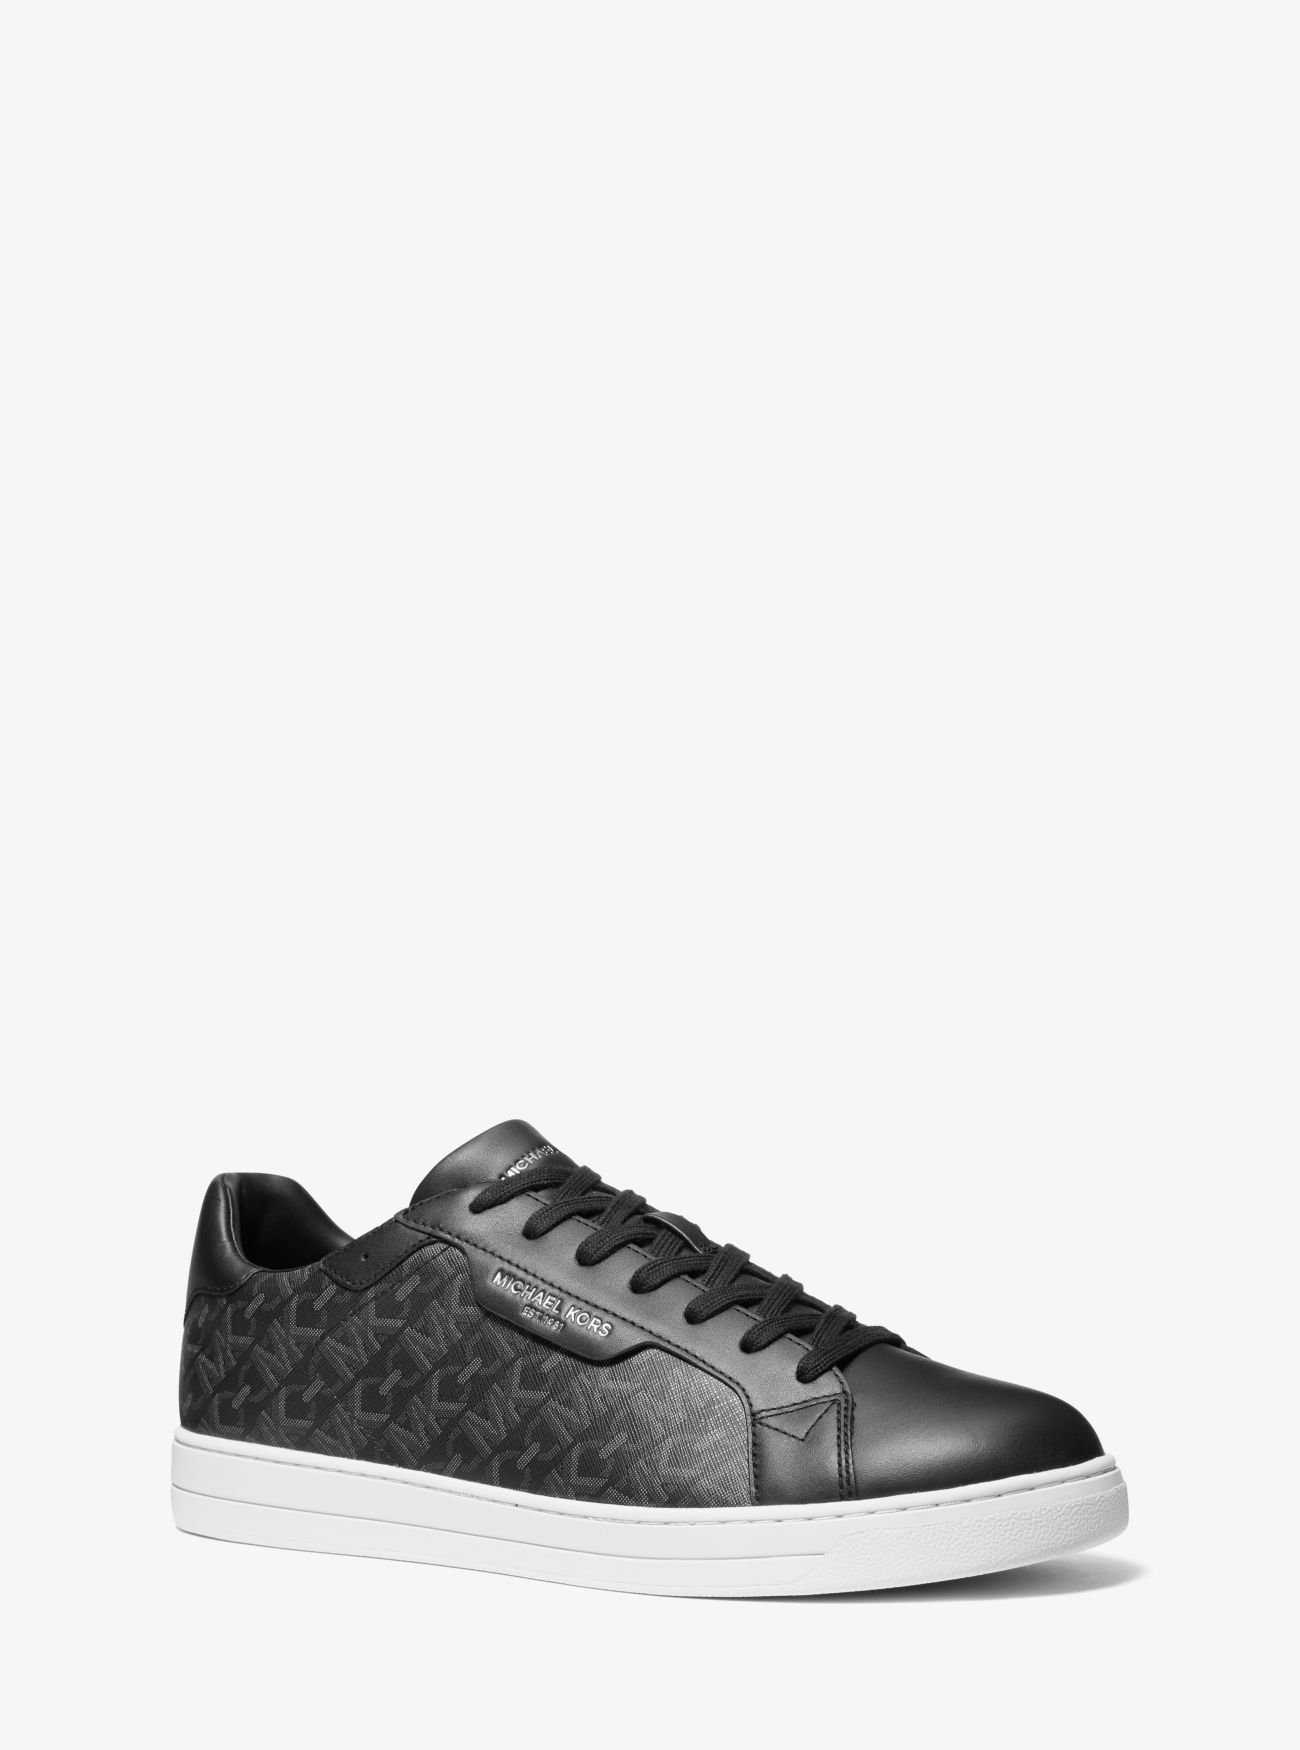 MK Keating Empire Signature Logo and Leather Trainers - Black Combo - Michael Kors